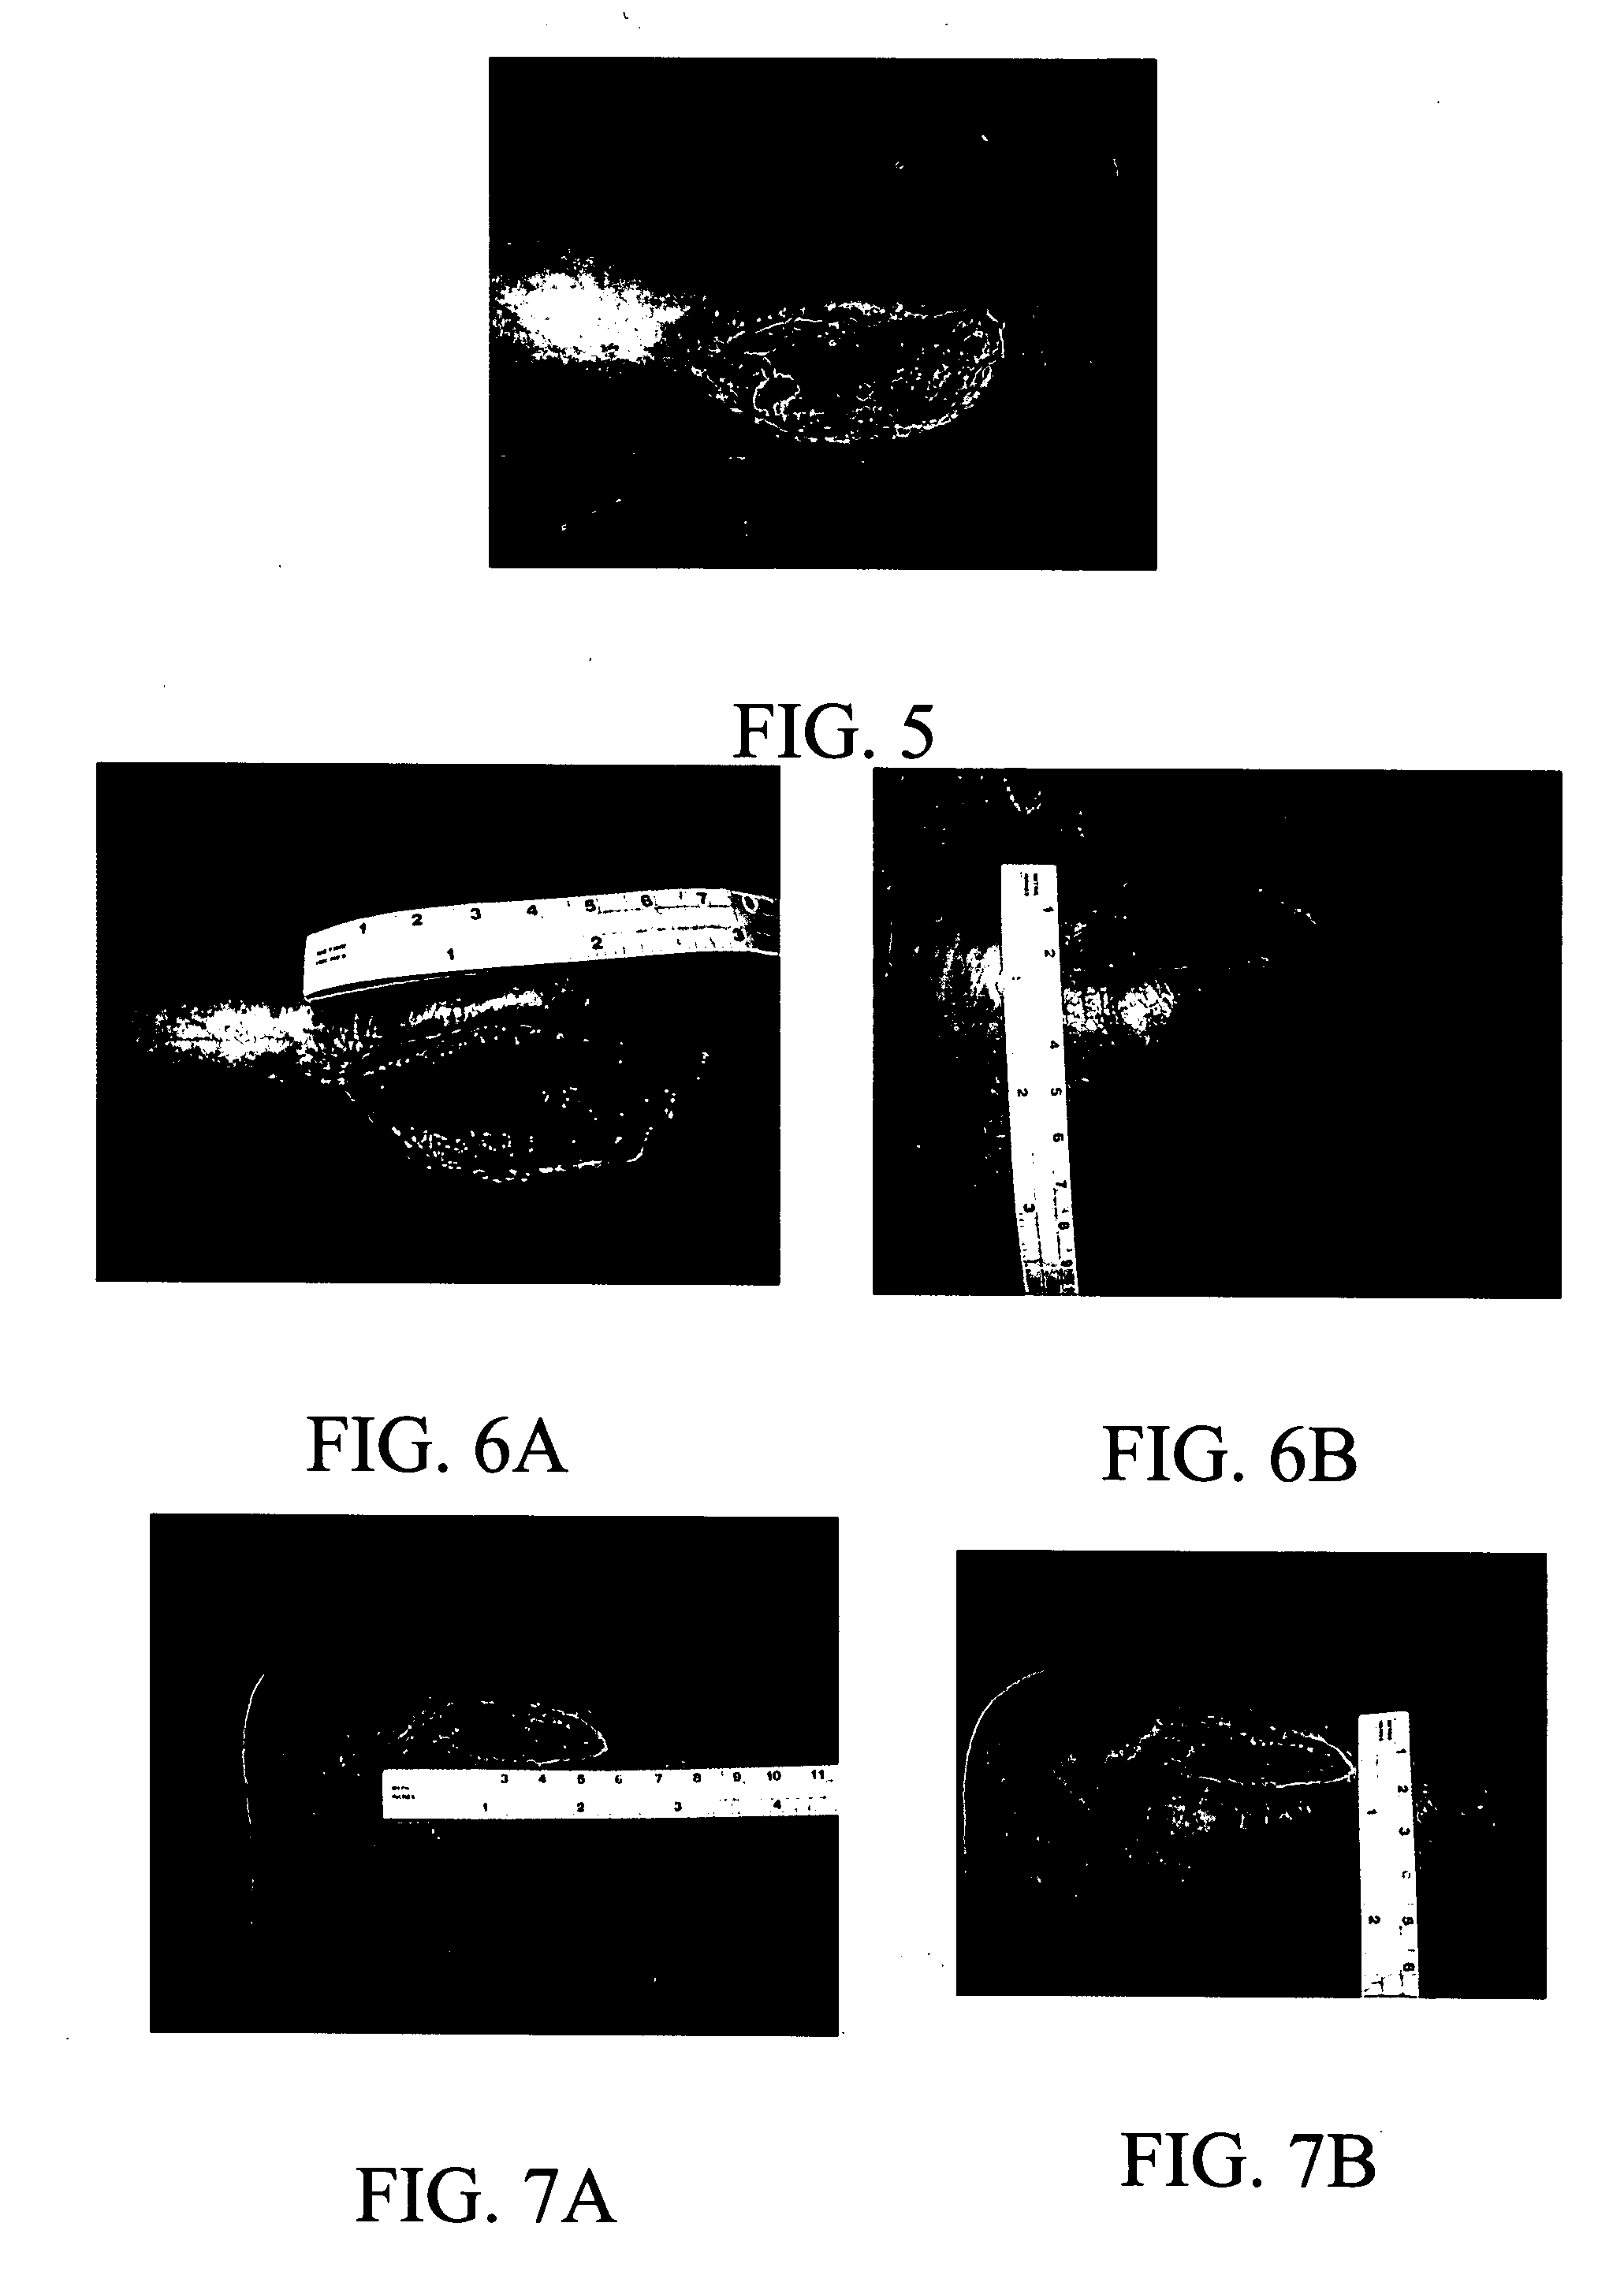 Materials and methods for wound treatment